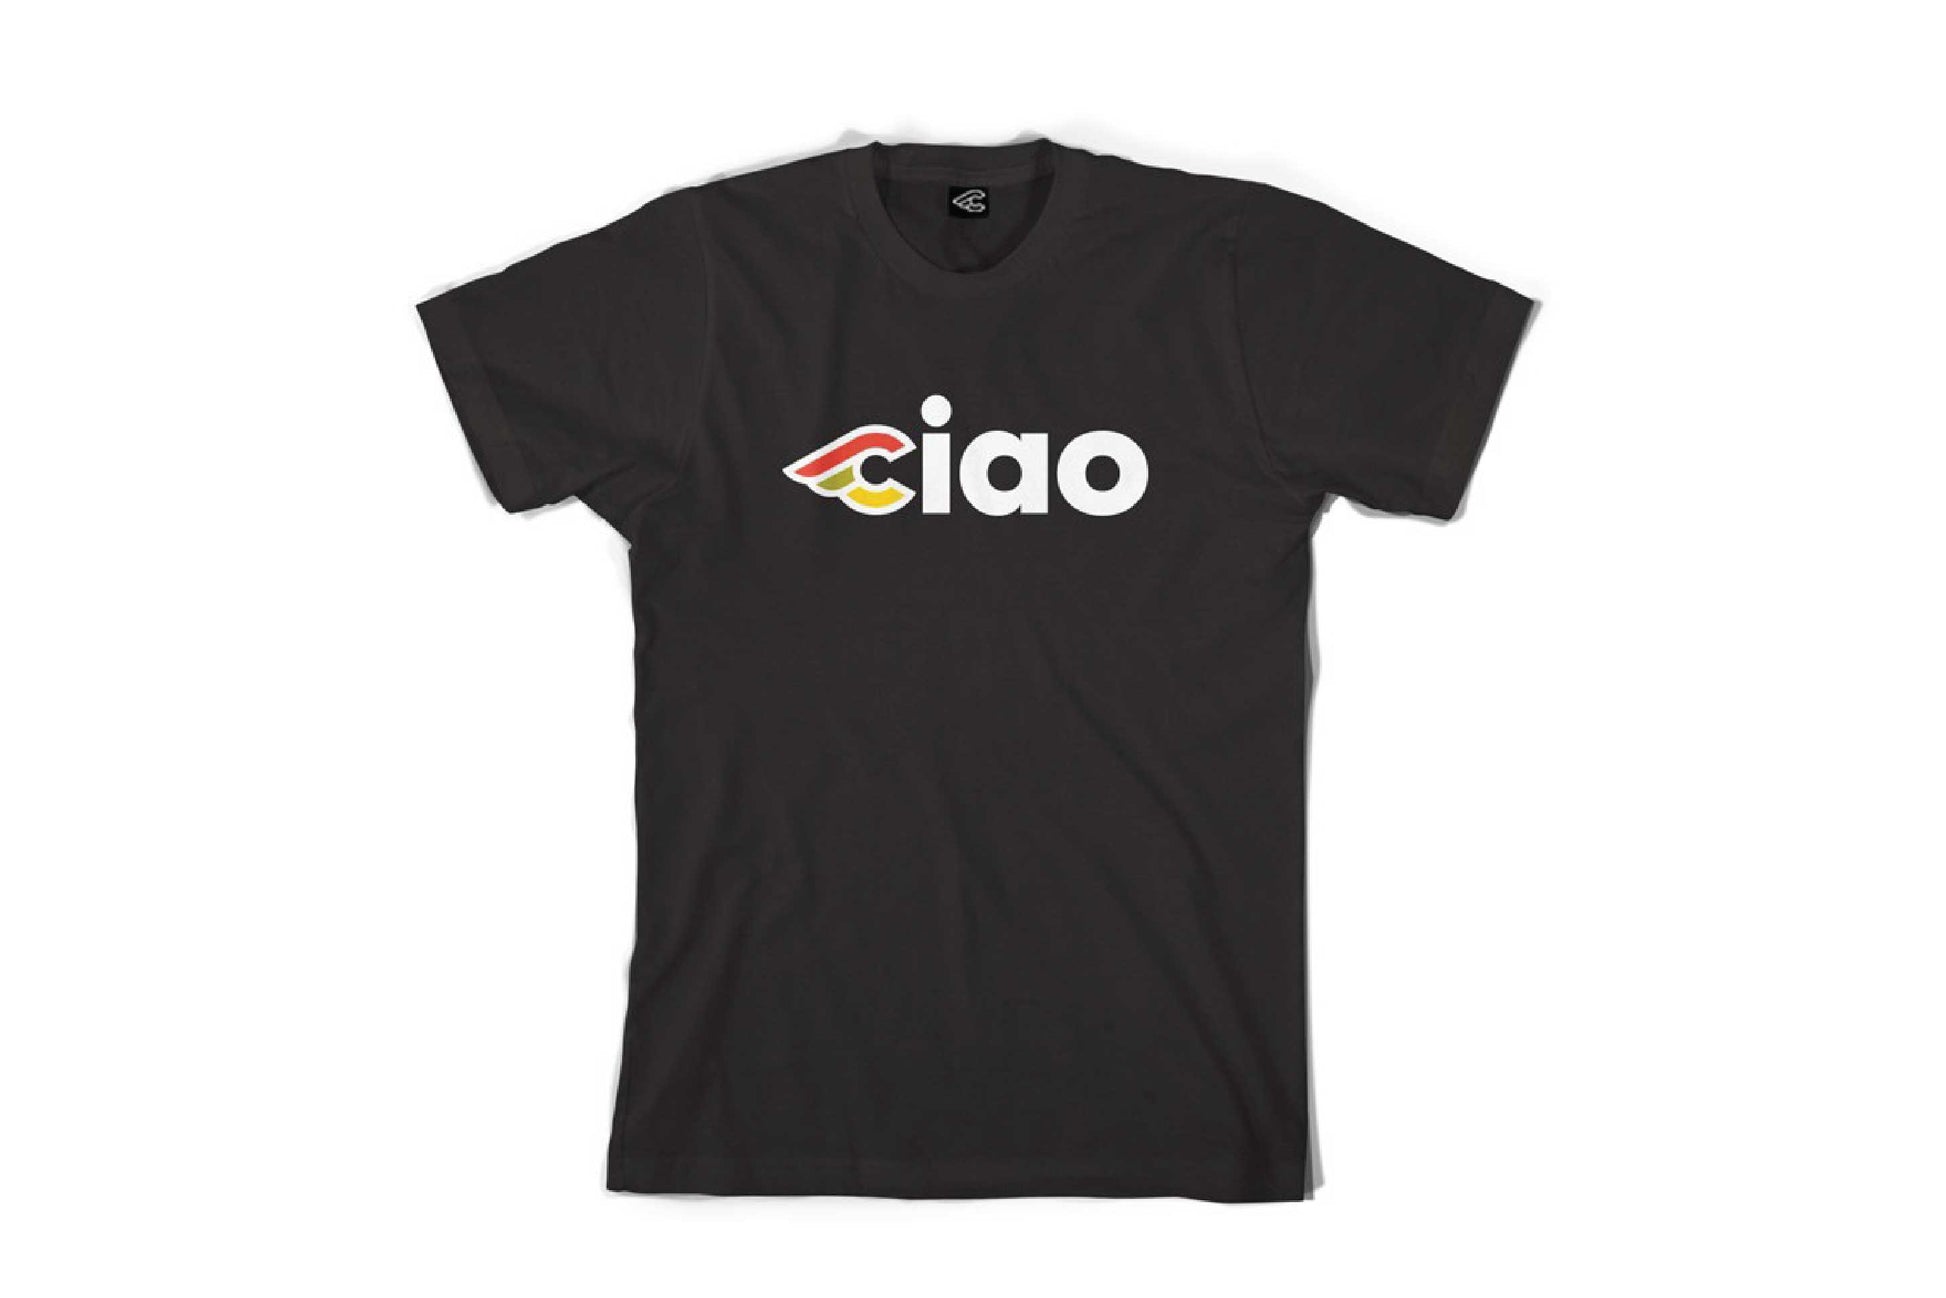 CINELLI Ciao Black T Shirt - FISHTAIL CYCLERY